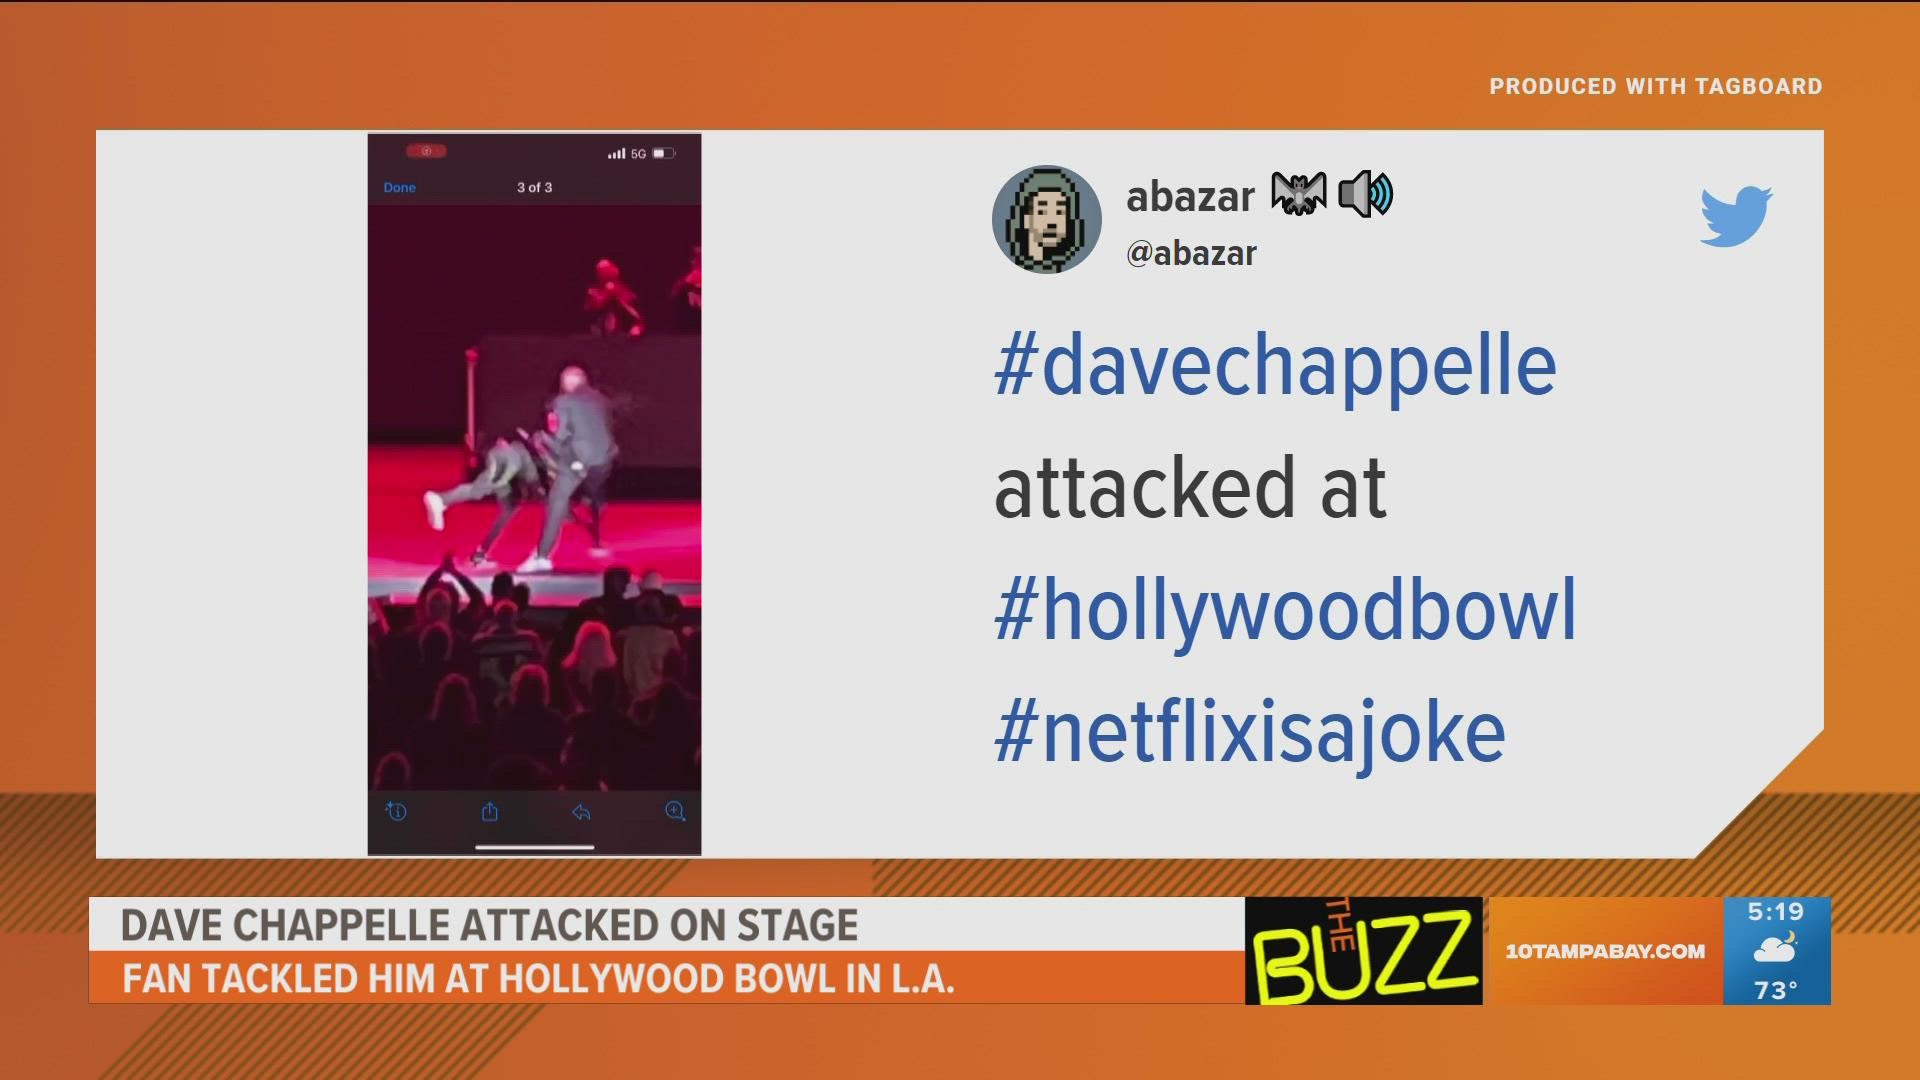 Video supposedly of the attack shows a man lunging at Chapelle while he speaks into the microphone on stage.